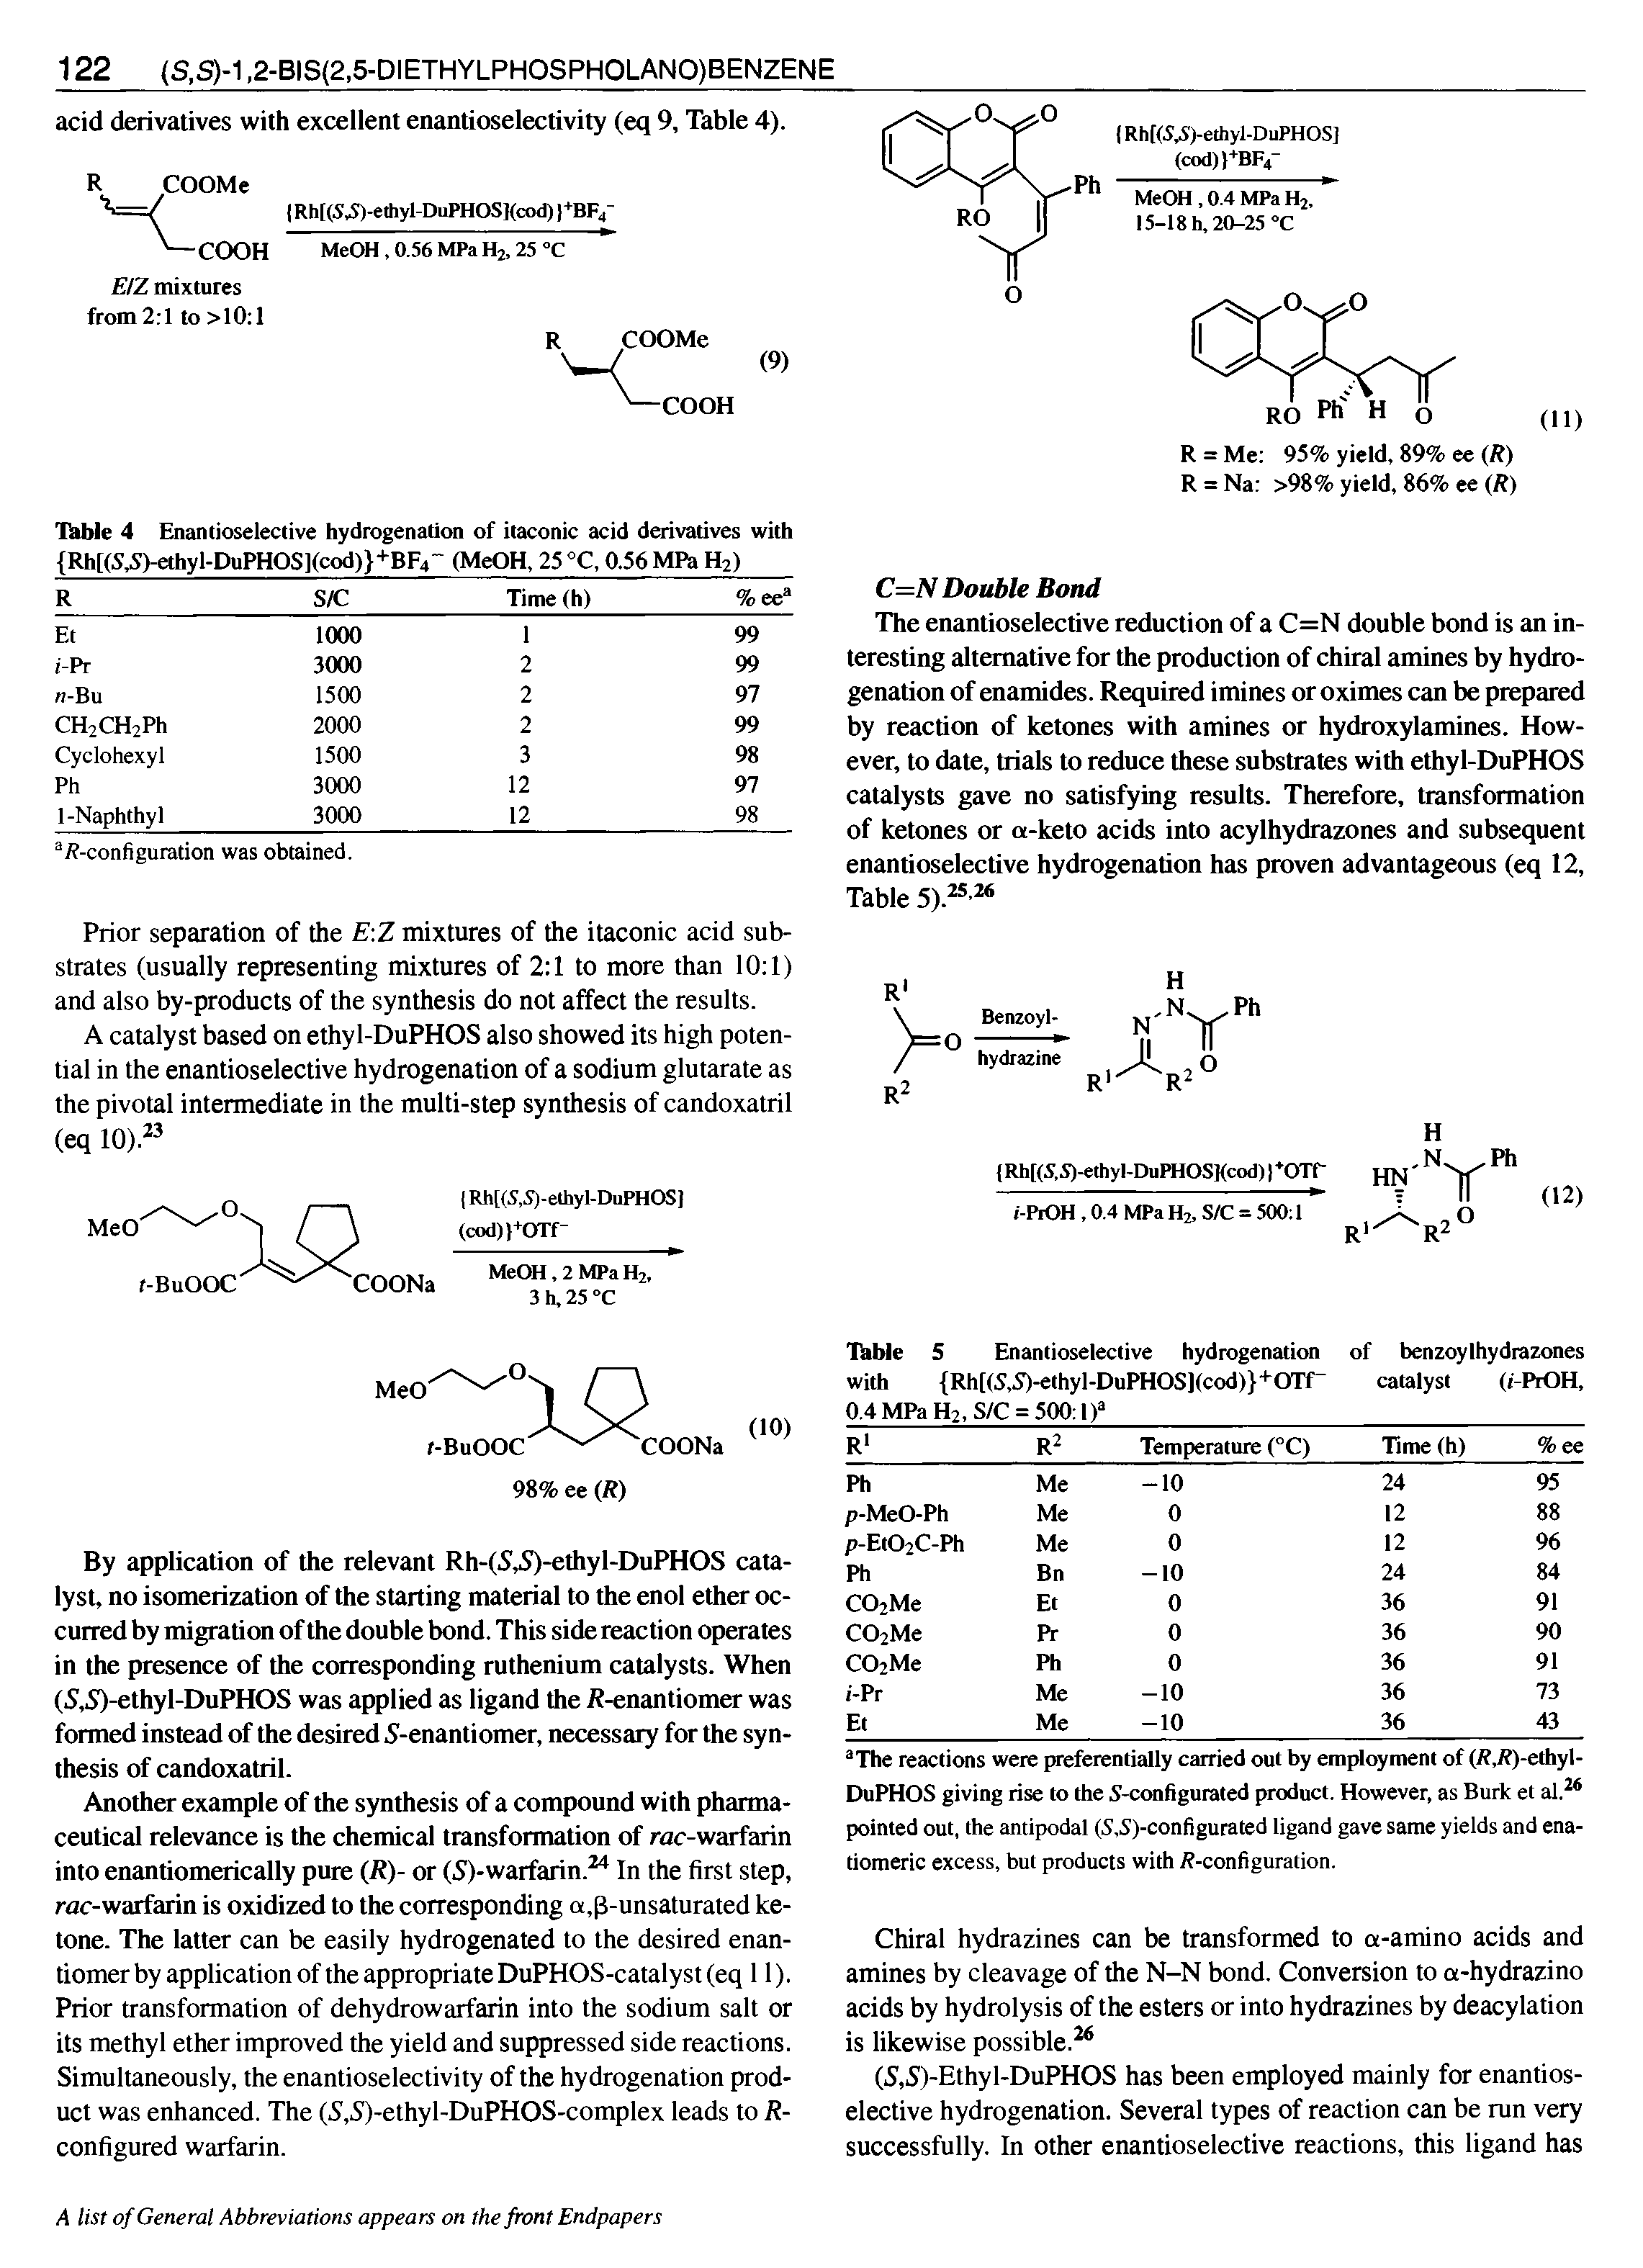 Table 4 Enantioselective hydrogenation of itaconic acid derivatives with Rh[(S,S)-ethyl-DuPHOS](cod) +BF4 (MeOH, 25 °C, 0.56 MPa Hz)...